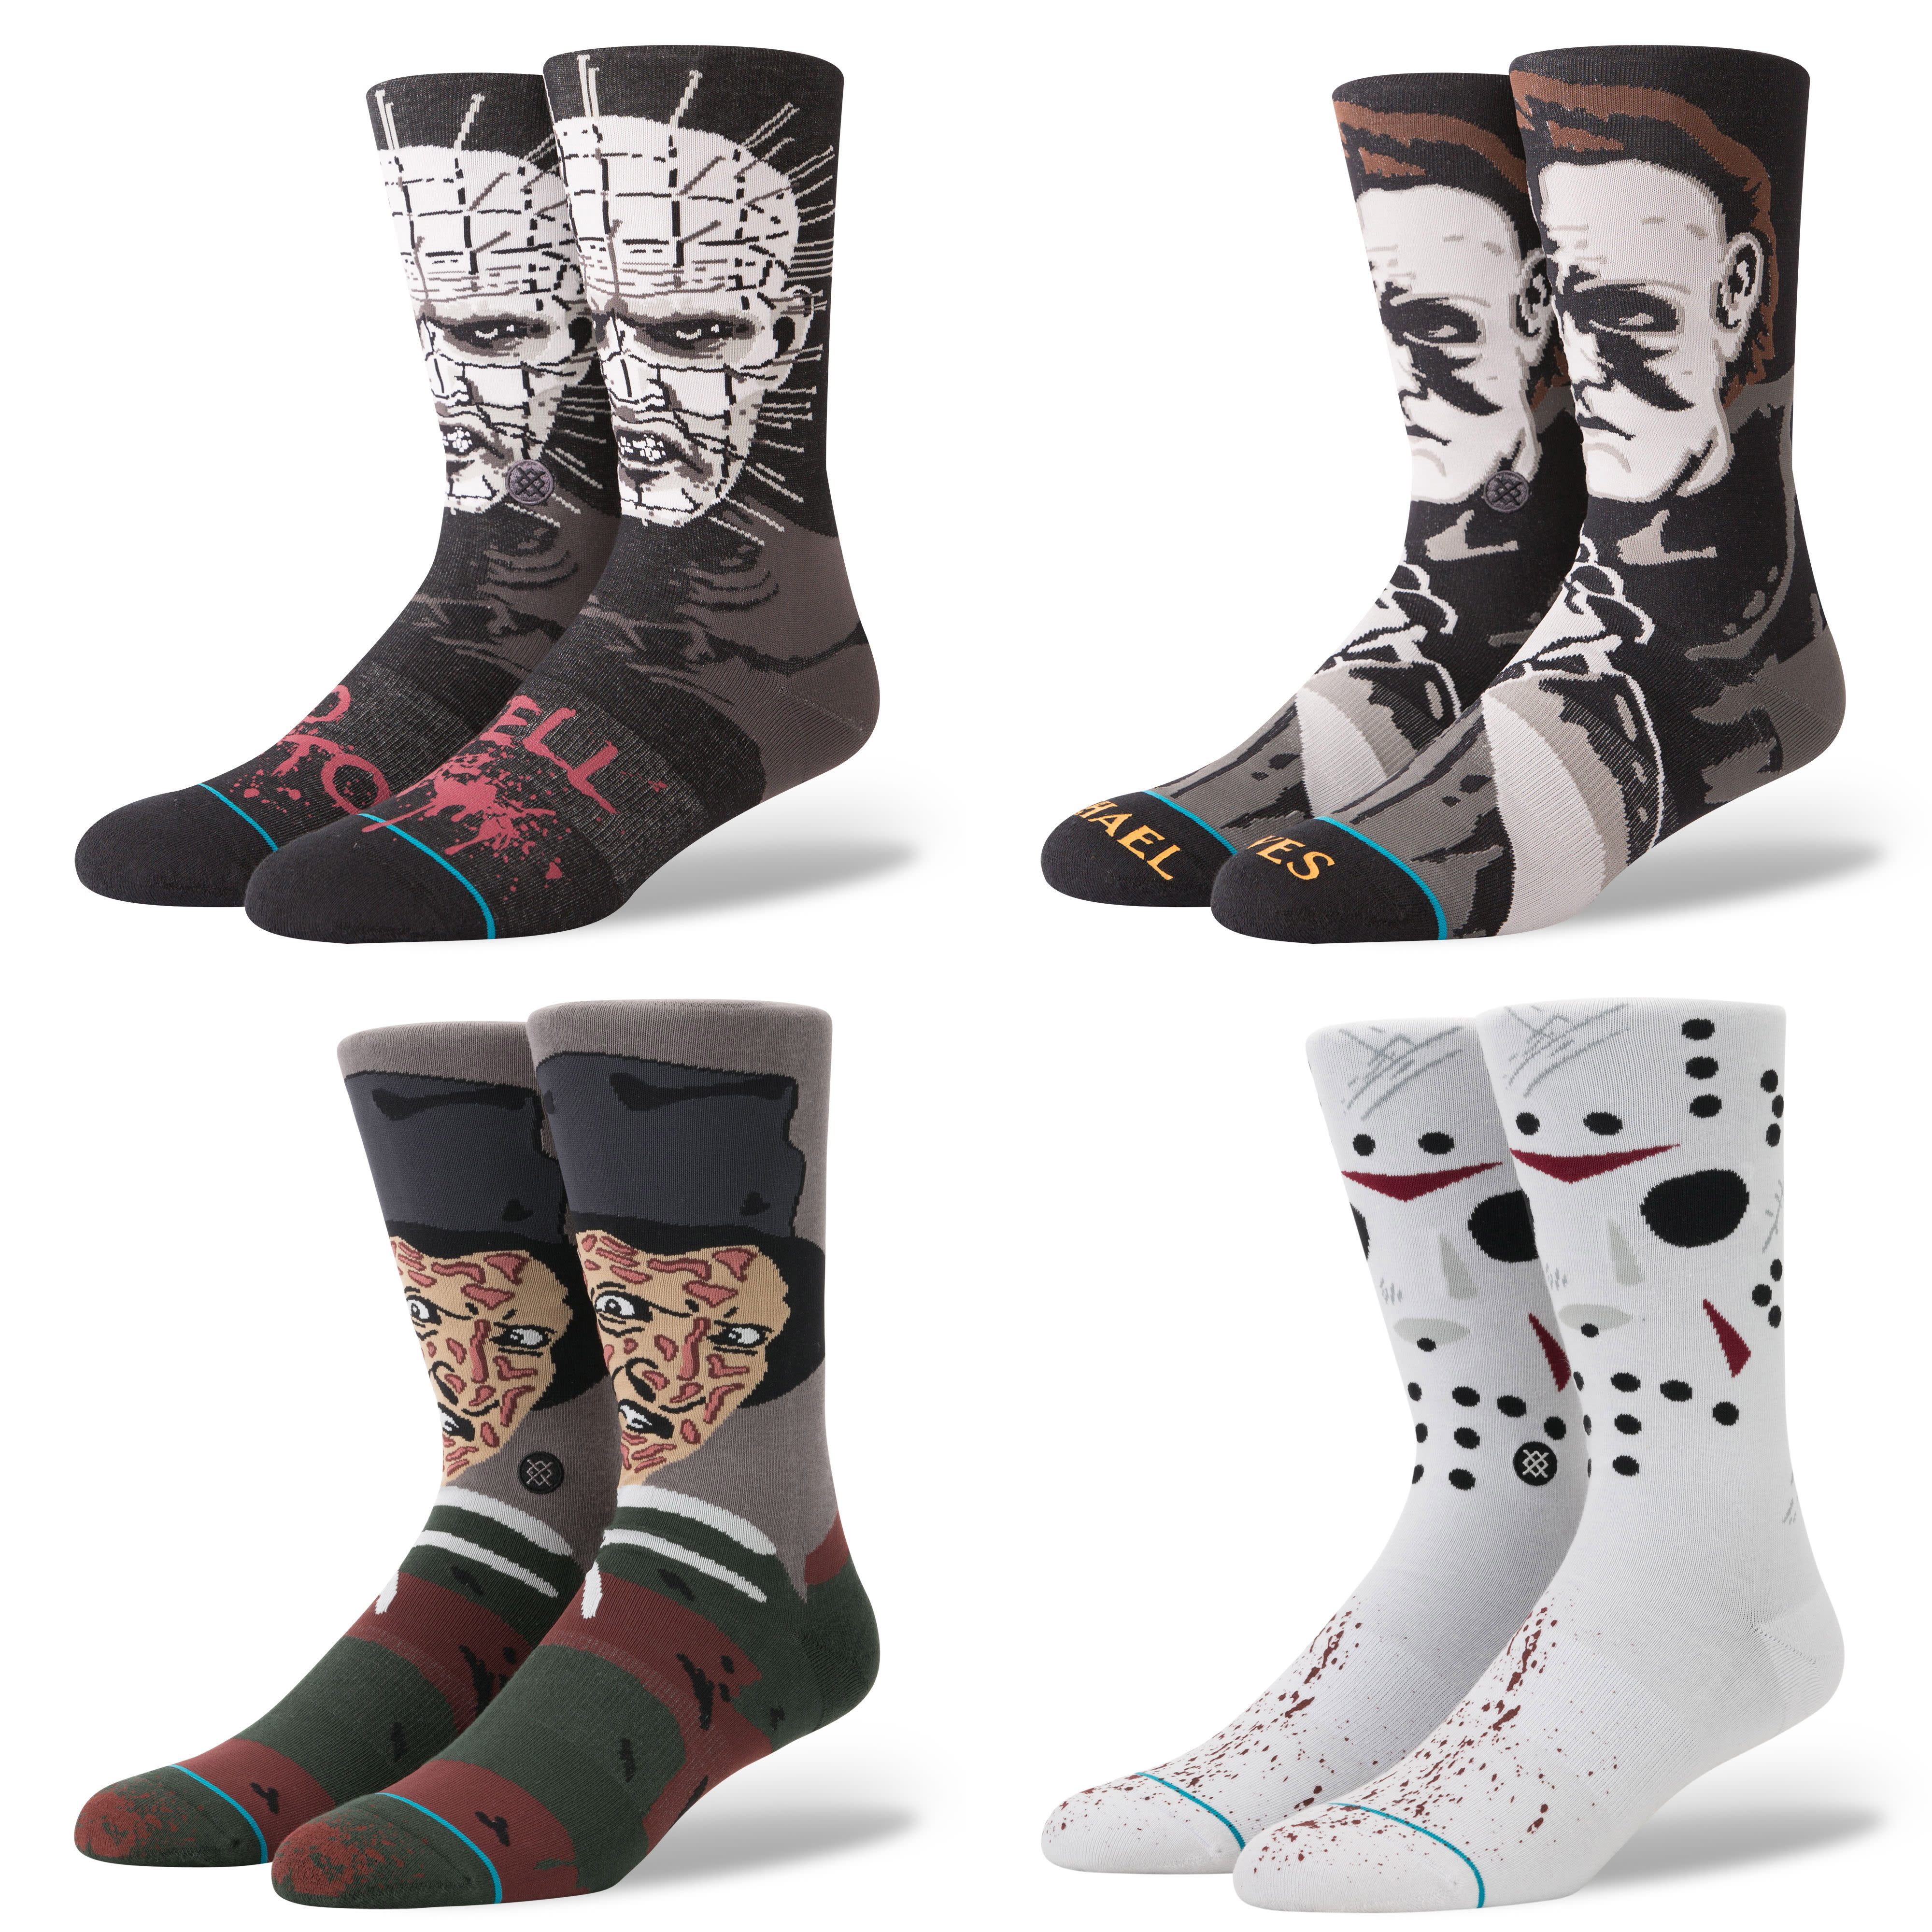 Stance Has Released A Collection Of Halloween-Themed Socks